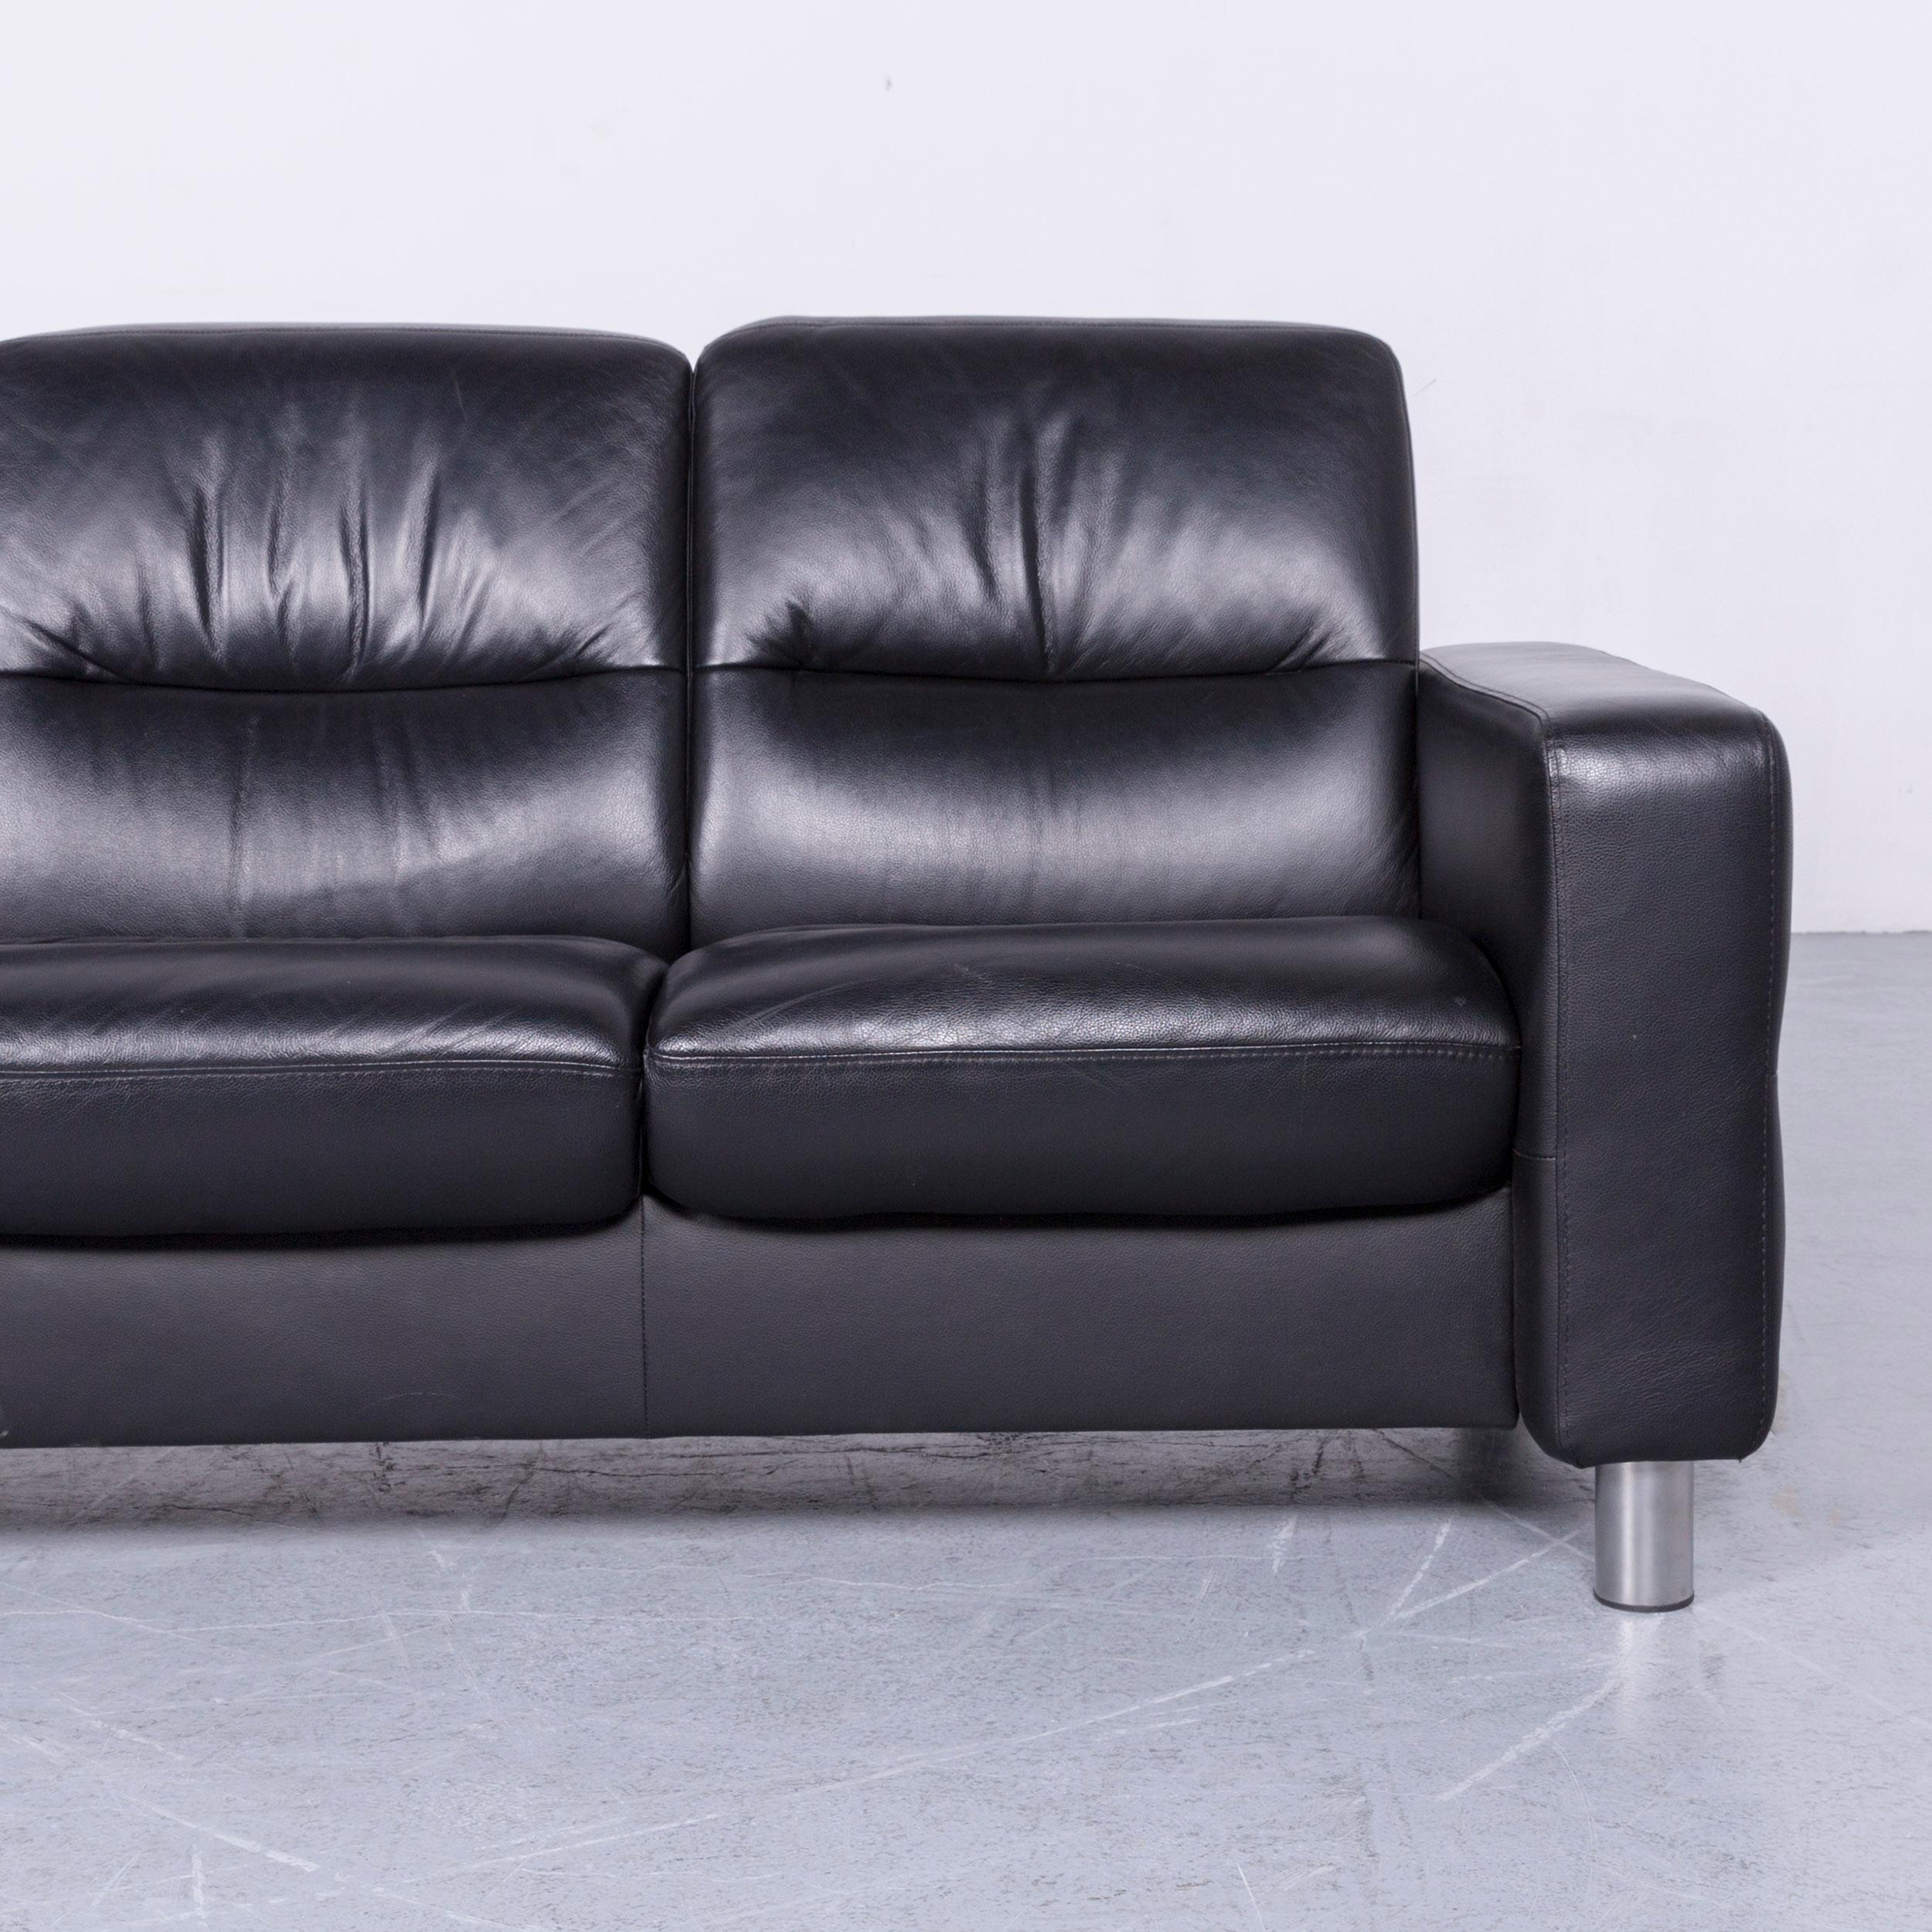 Contemporary Ekornes Stressless Relax Sofa Black Leather TV Recliner Three-Seat For Sale